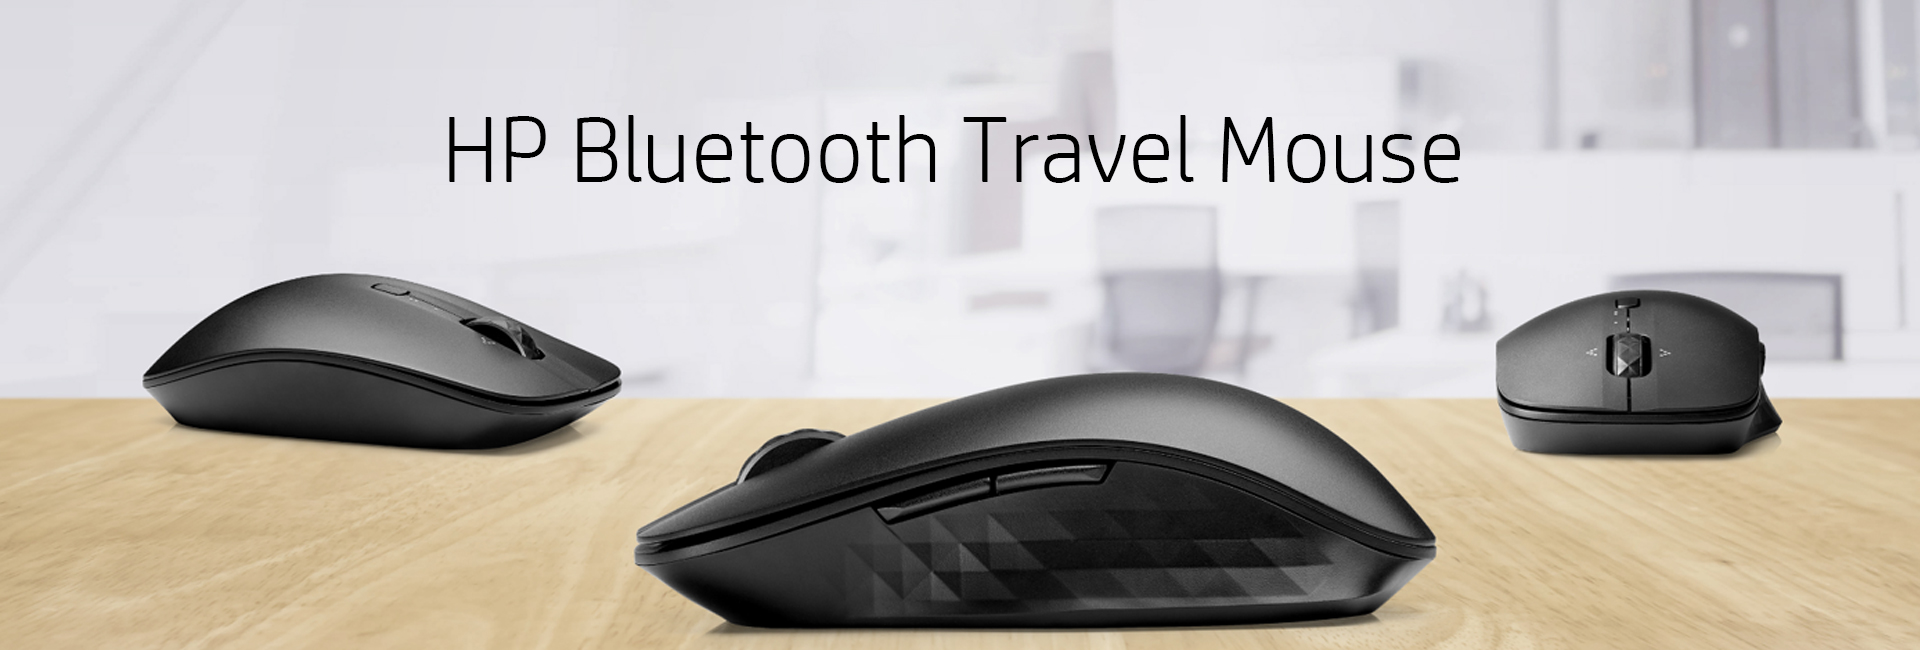 HP Bluetooth Travel Mouse - HP Store Canada